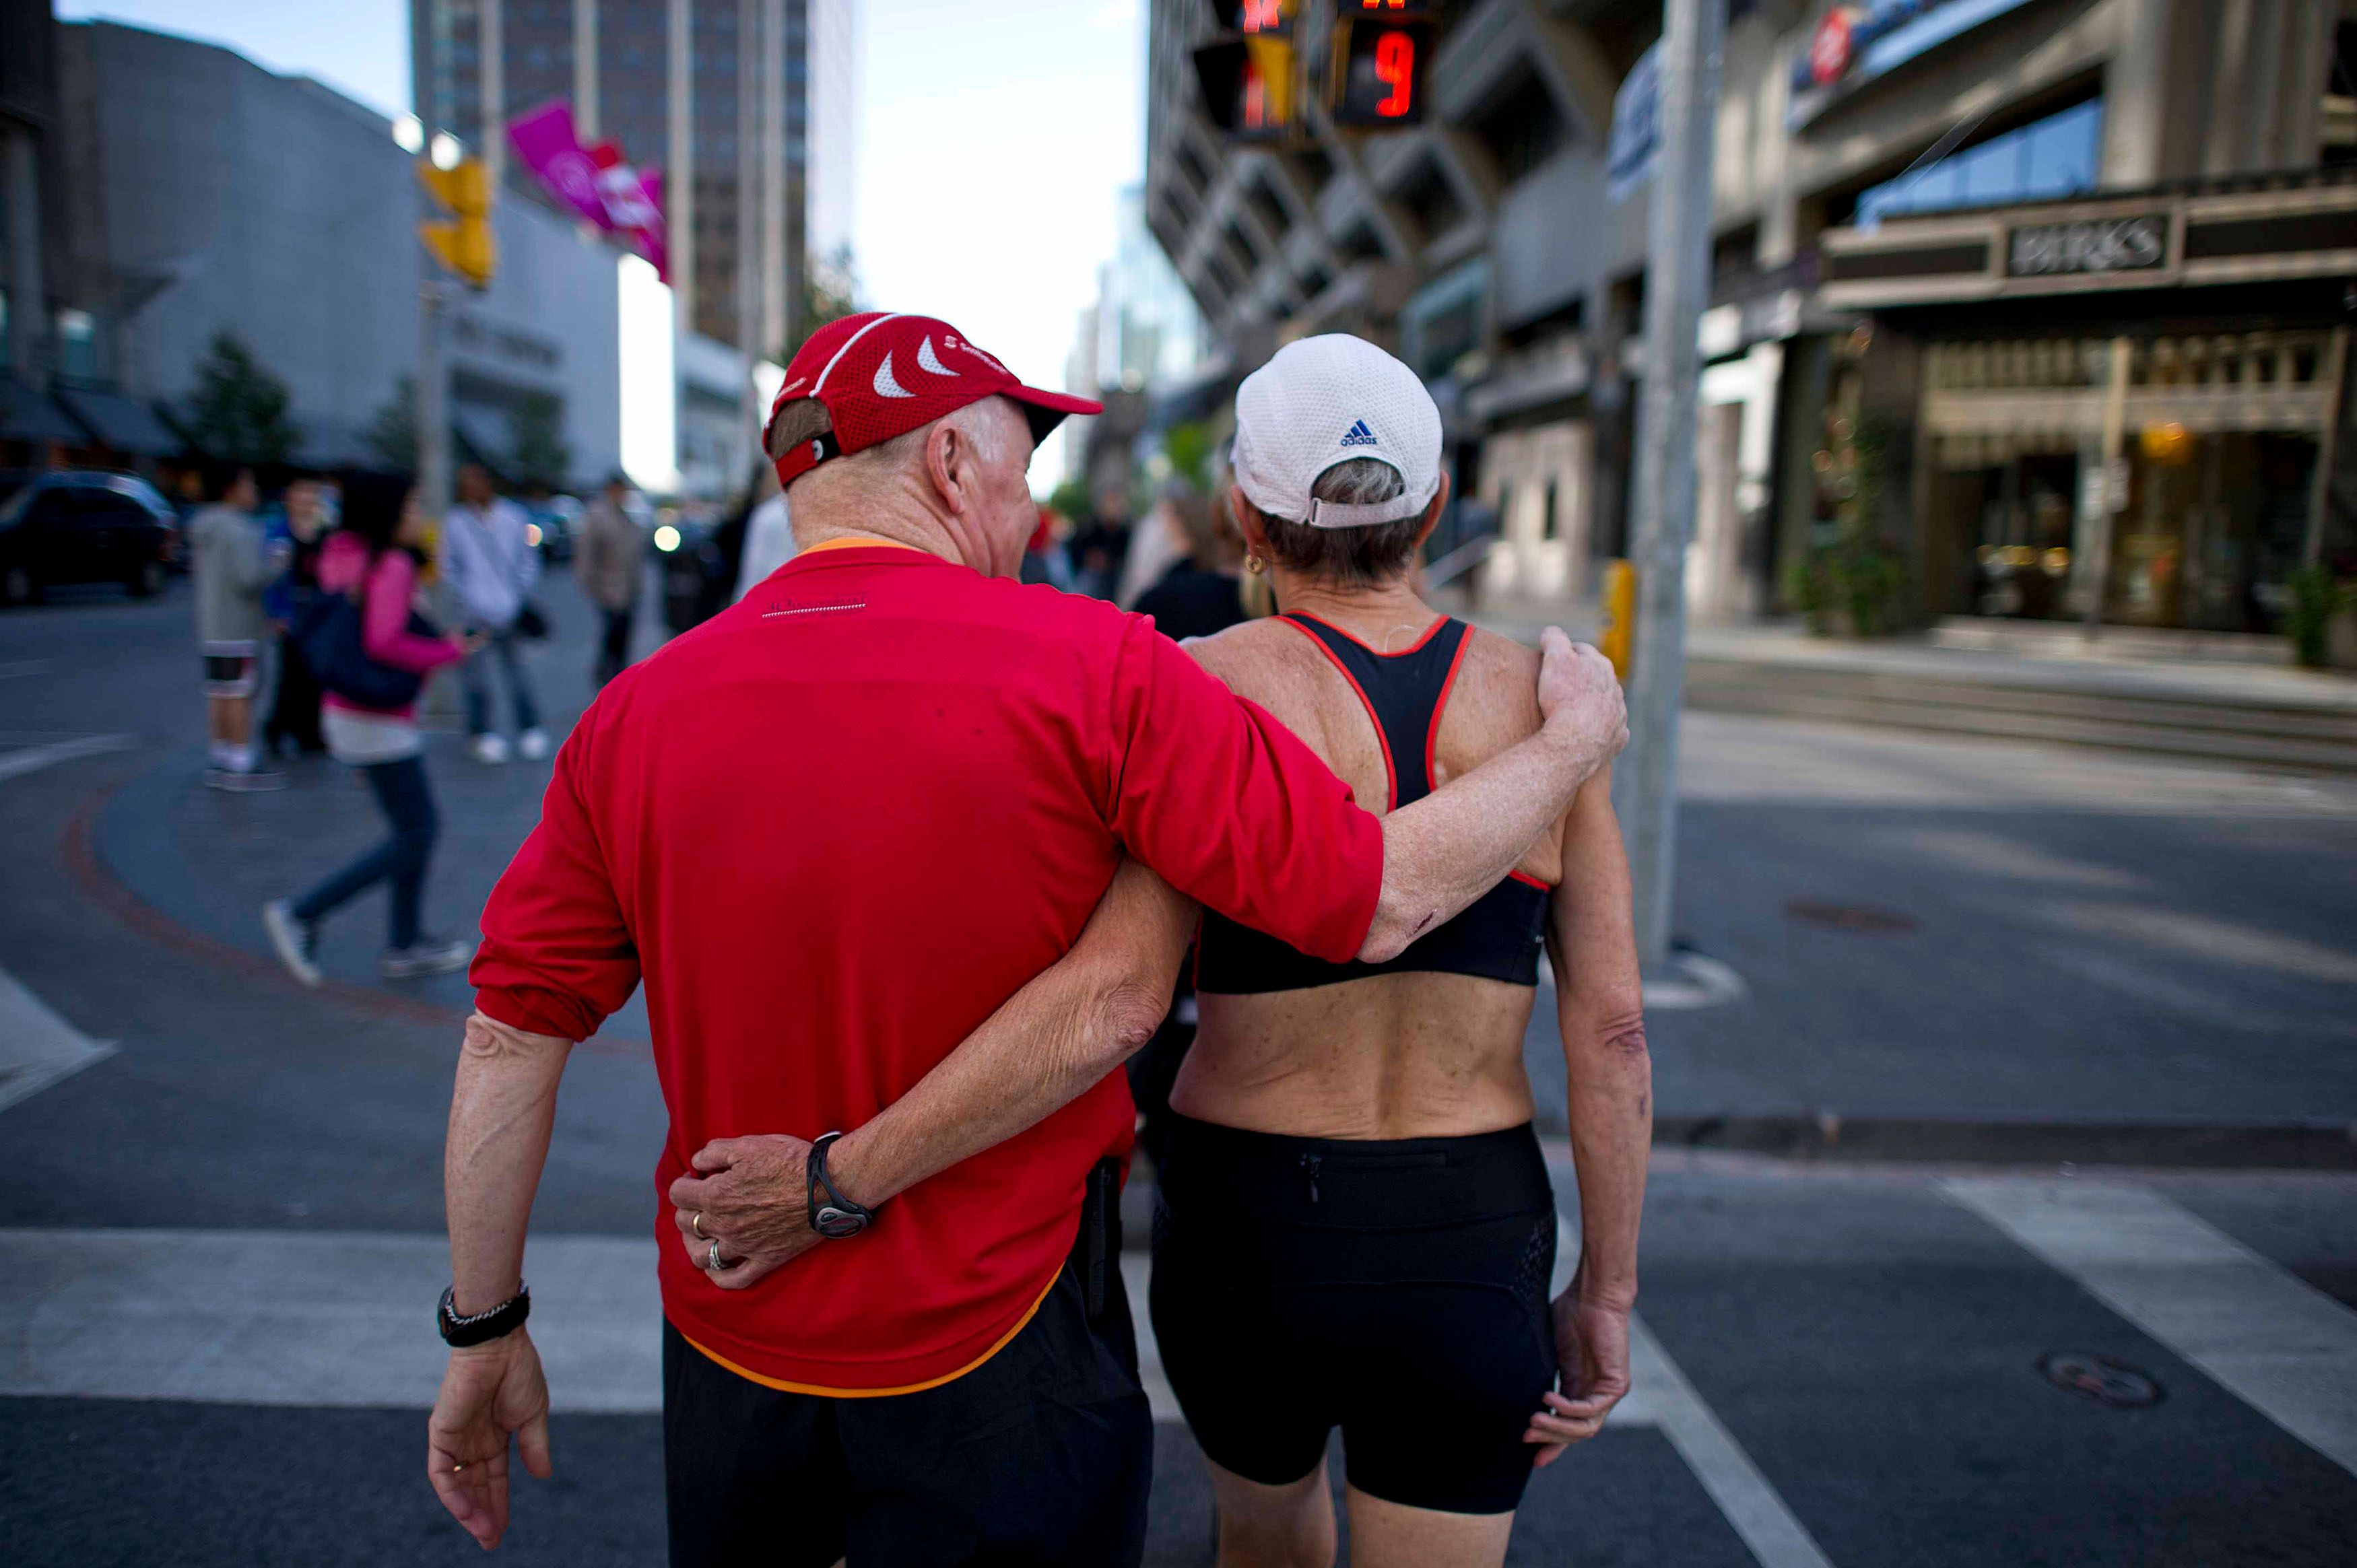 Bob and Jean walk eastward on Bloor Street after a morning run (Photograph by Cole Garside)